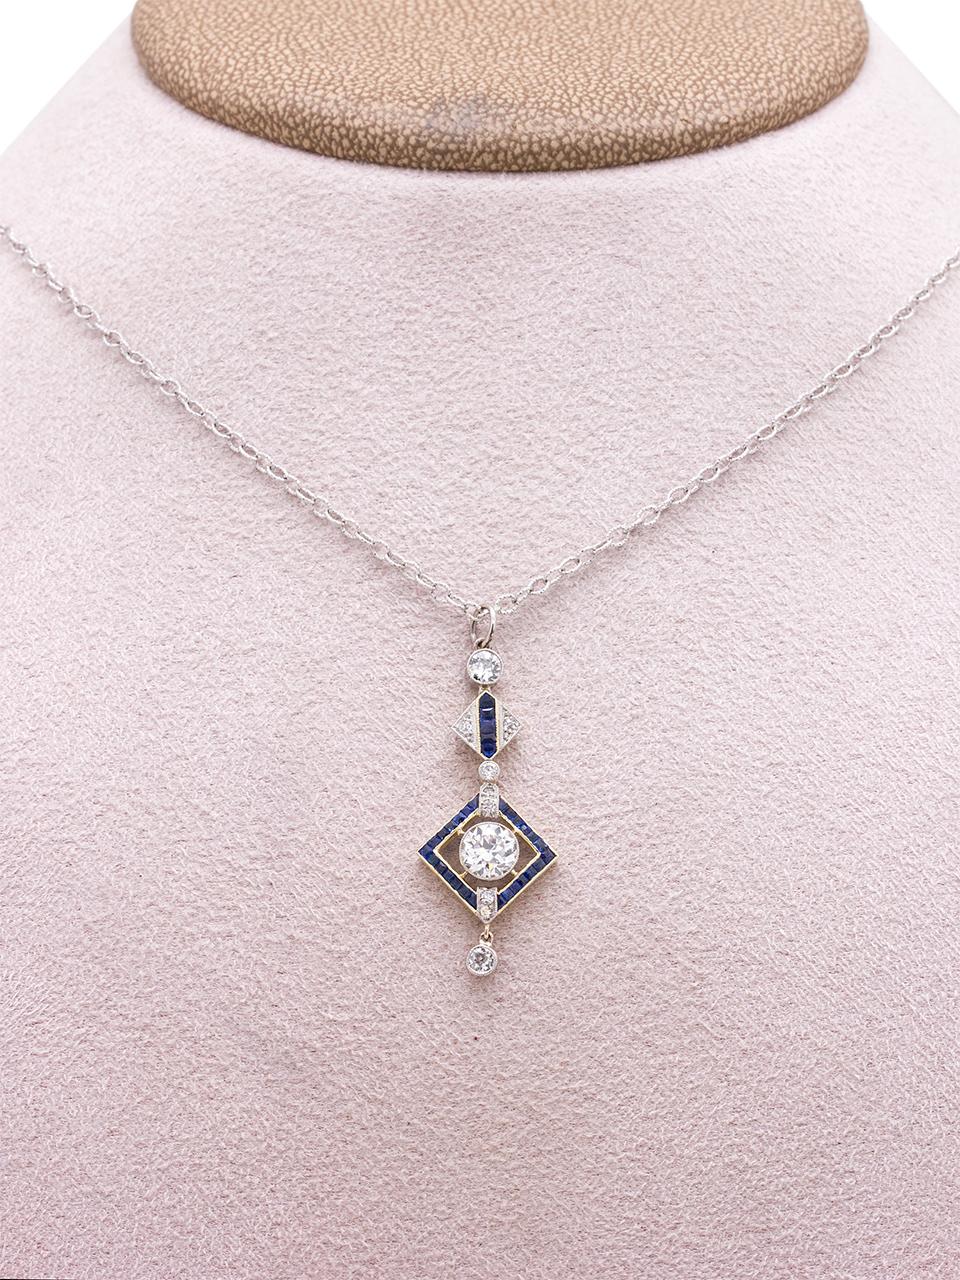 Significant Art Deco elongated platinum pendant, featuring a gorgeously cut 0.85ct Old European Cut center diamond, surrounded by smaller OEC diamonds and bezel-set calibrated blue sapphires. Hinged components allow this lovely piece to move freely